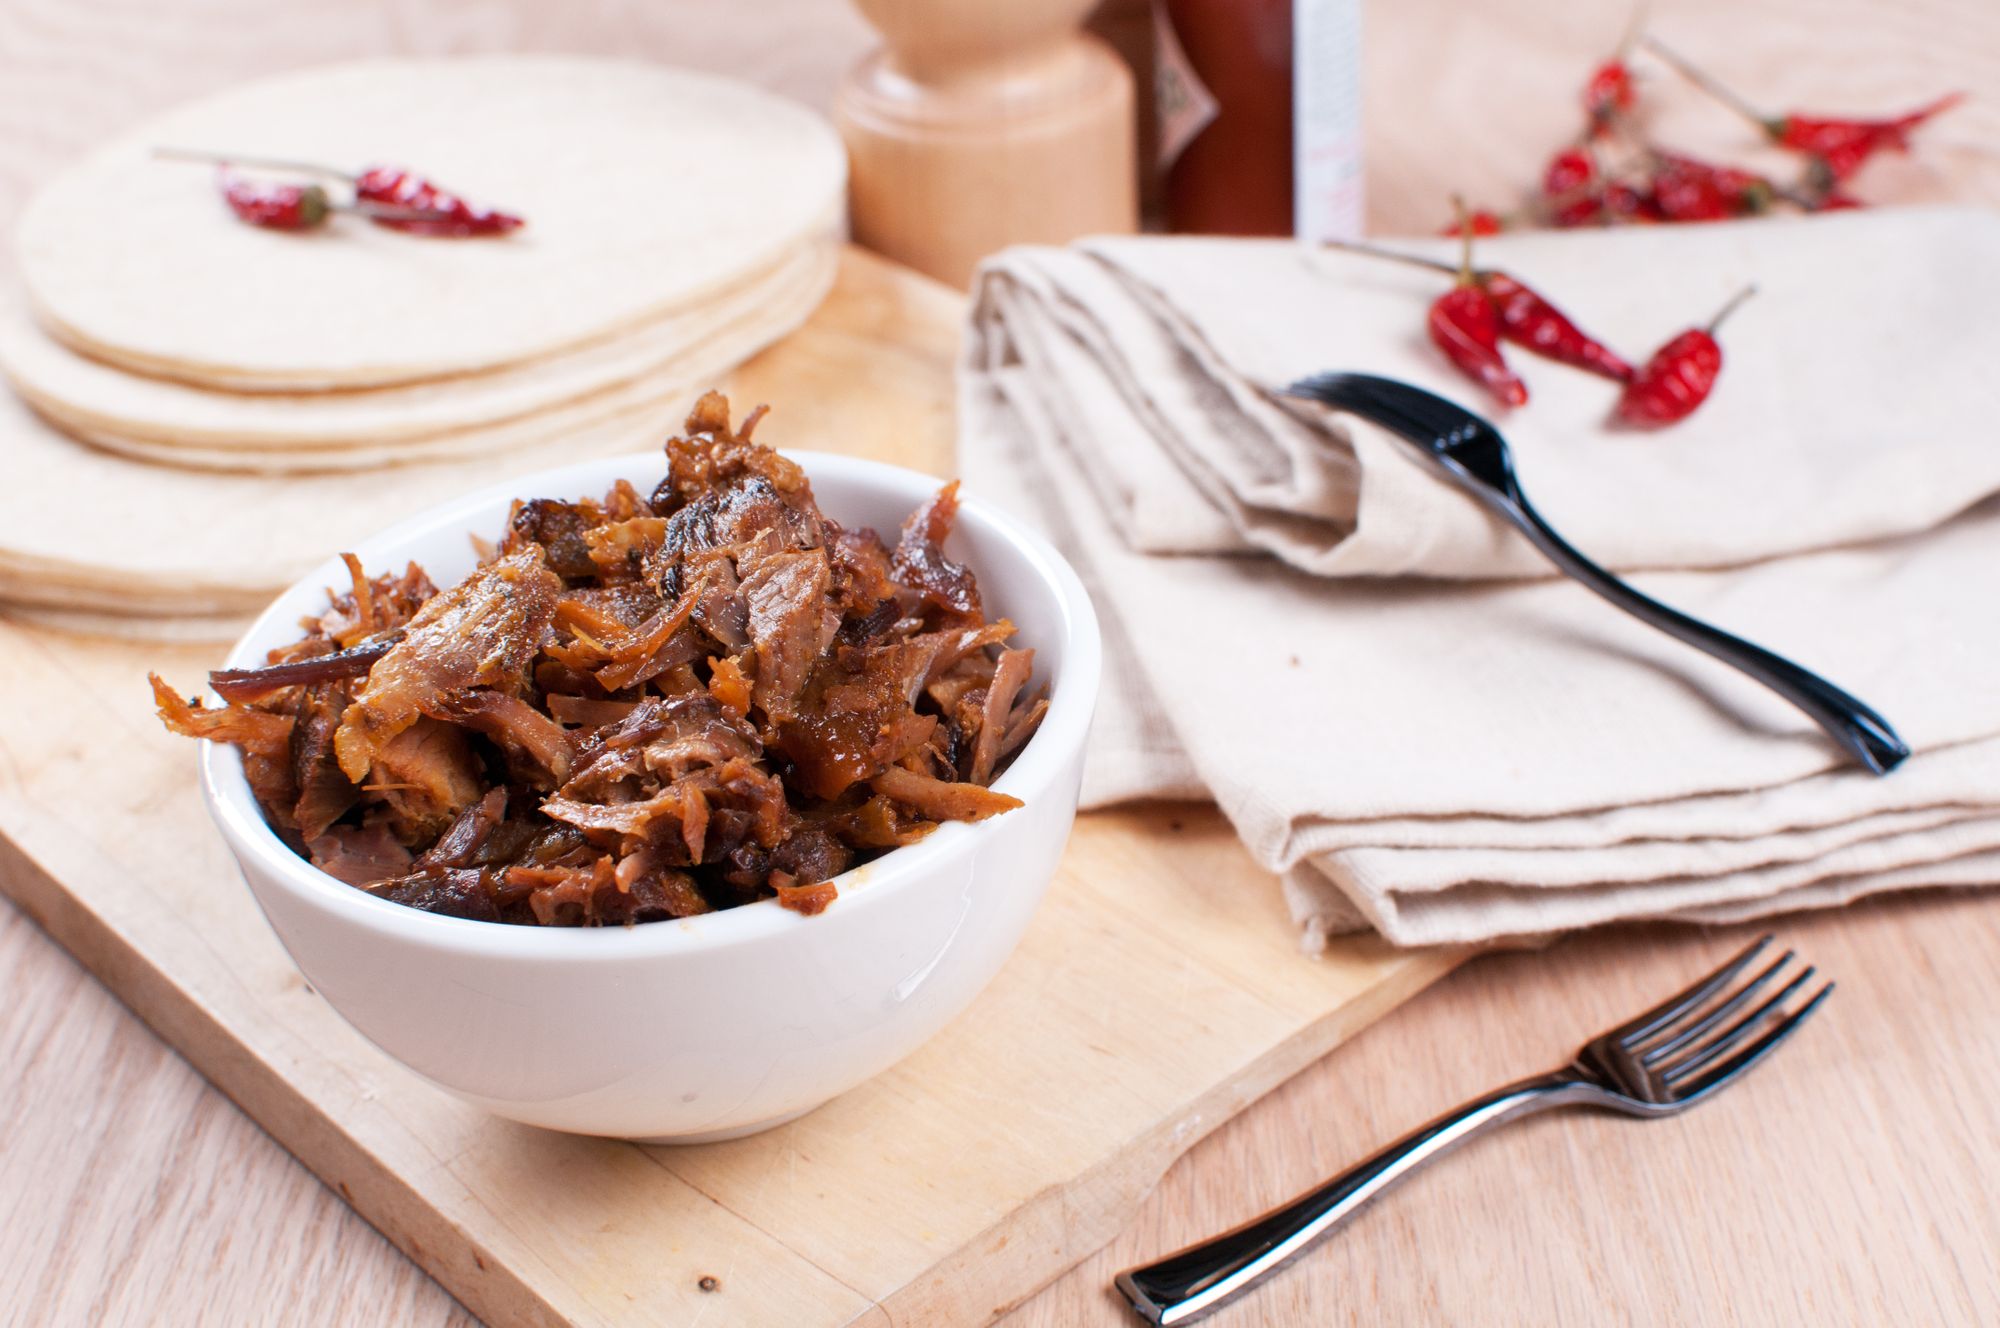 Shredded Duck with Plums and Spices